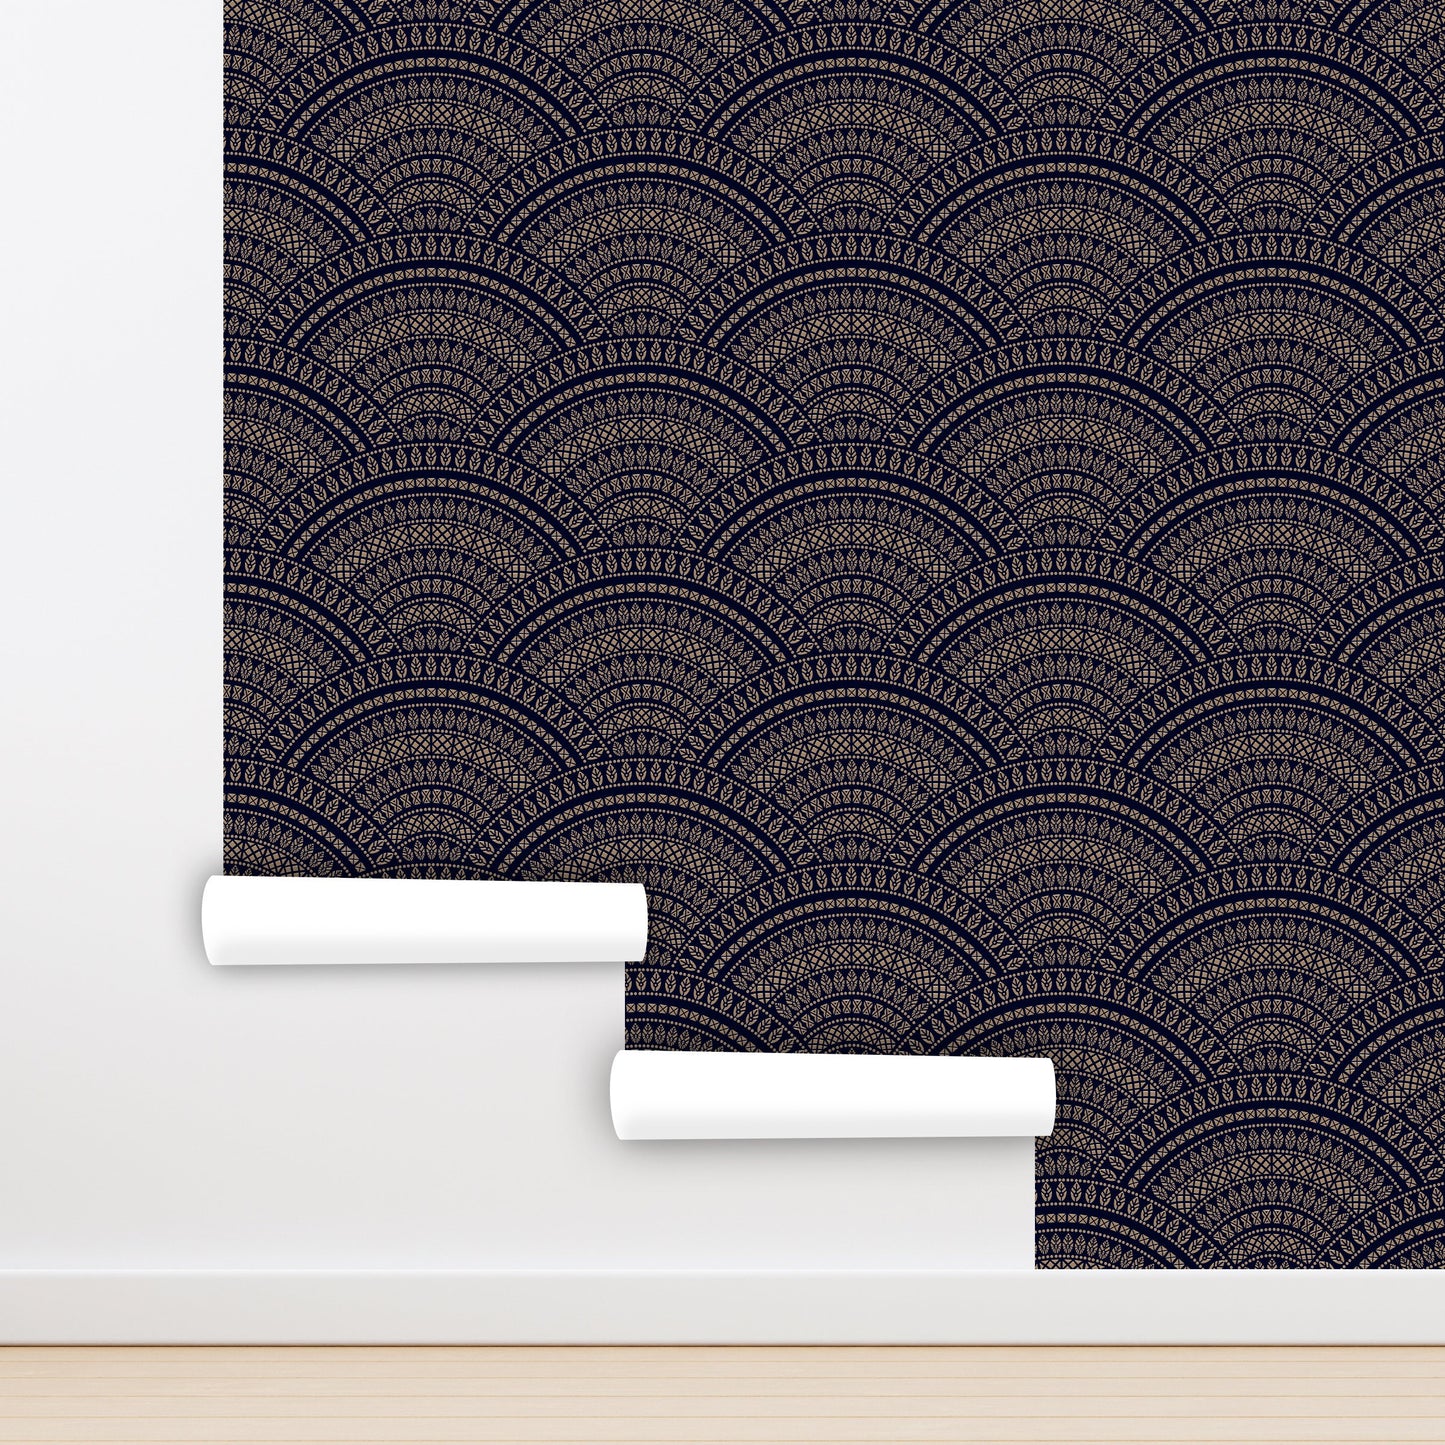 Scallop Wallpaper Peel and Stick, Black Geometric Wallpaper, Removable Wall Paper